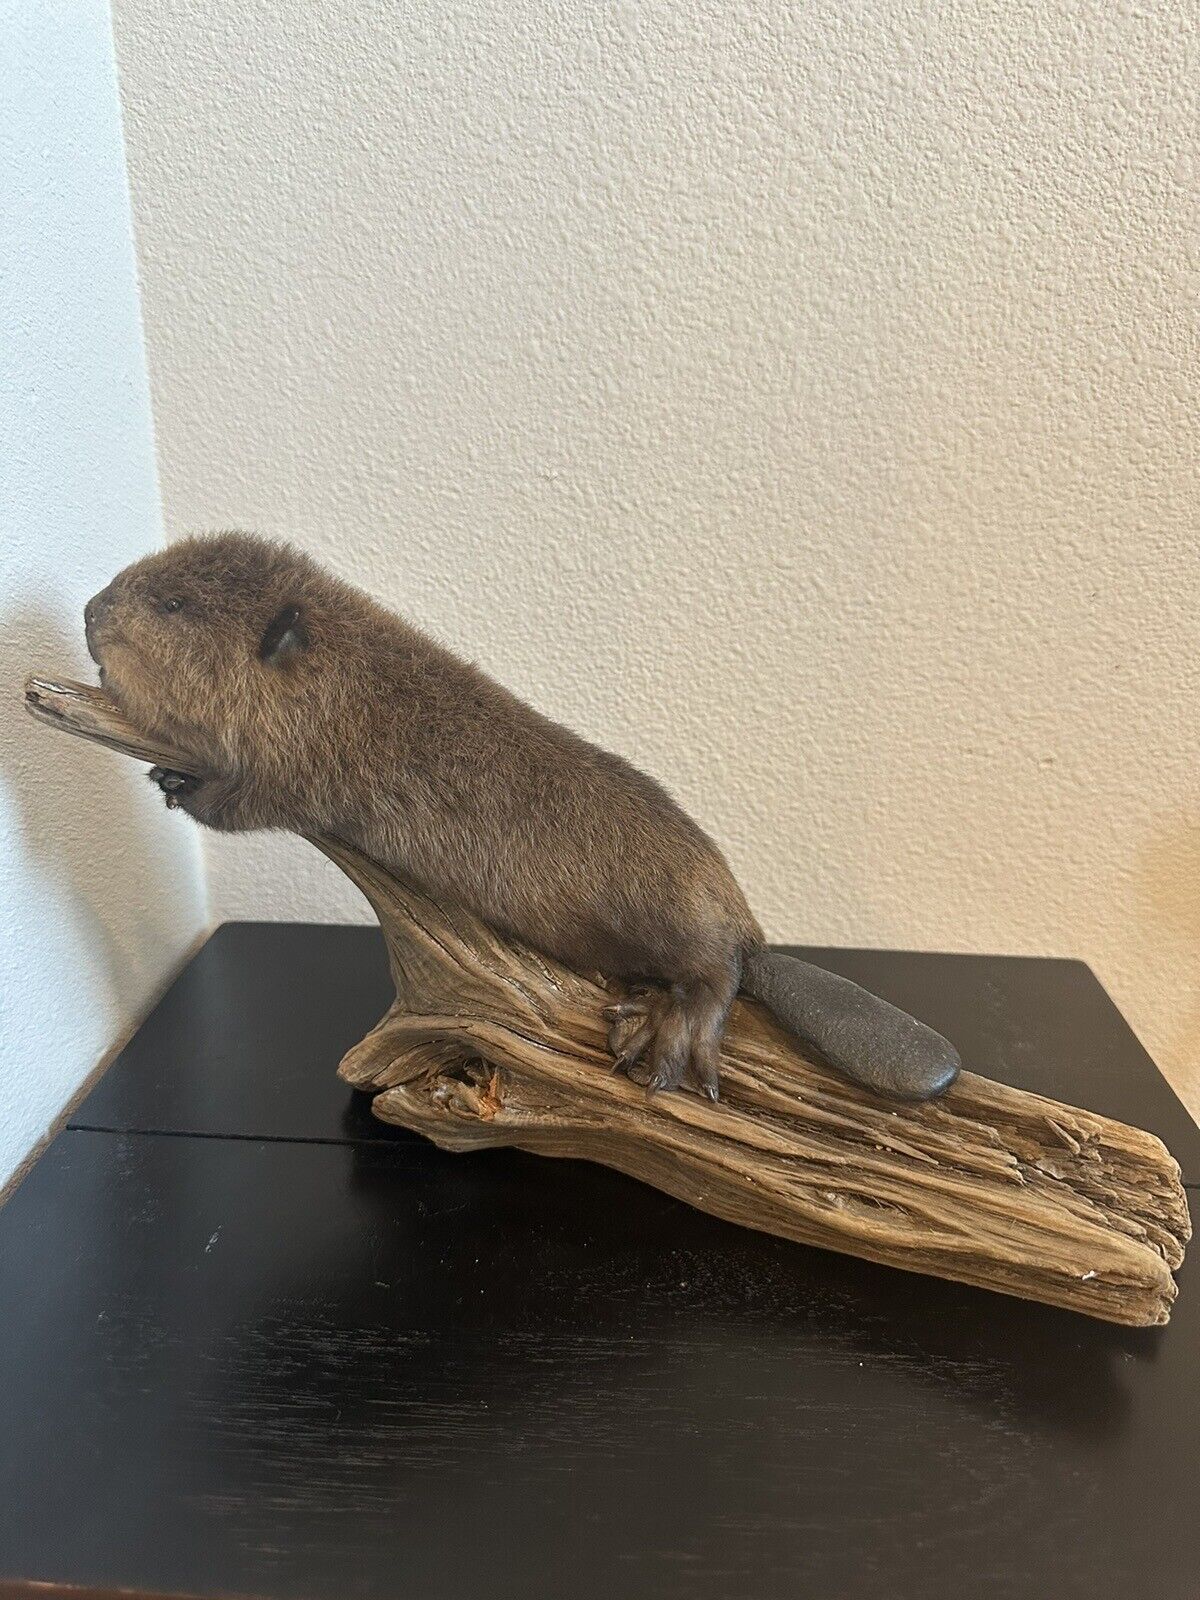 Museum Quality Beautiful Adorable Baby Beaver Kit Taxidermy Mount Art Wildlife